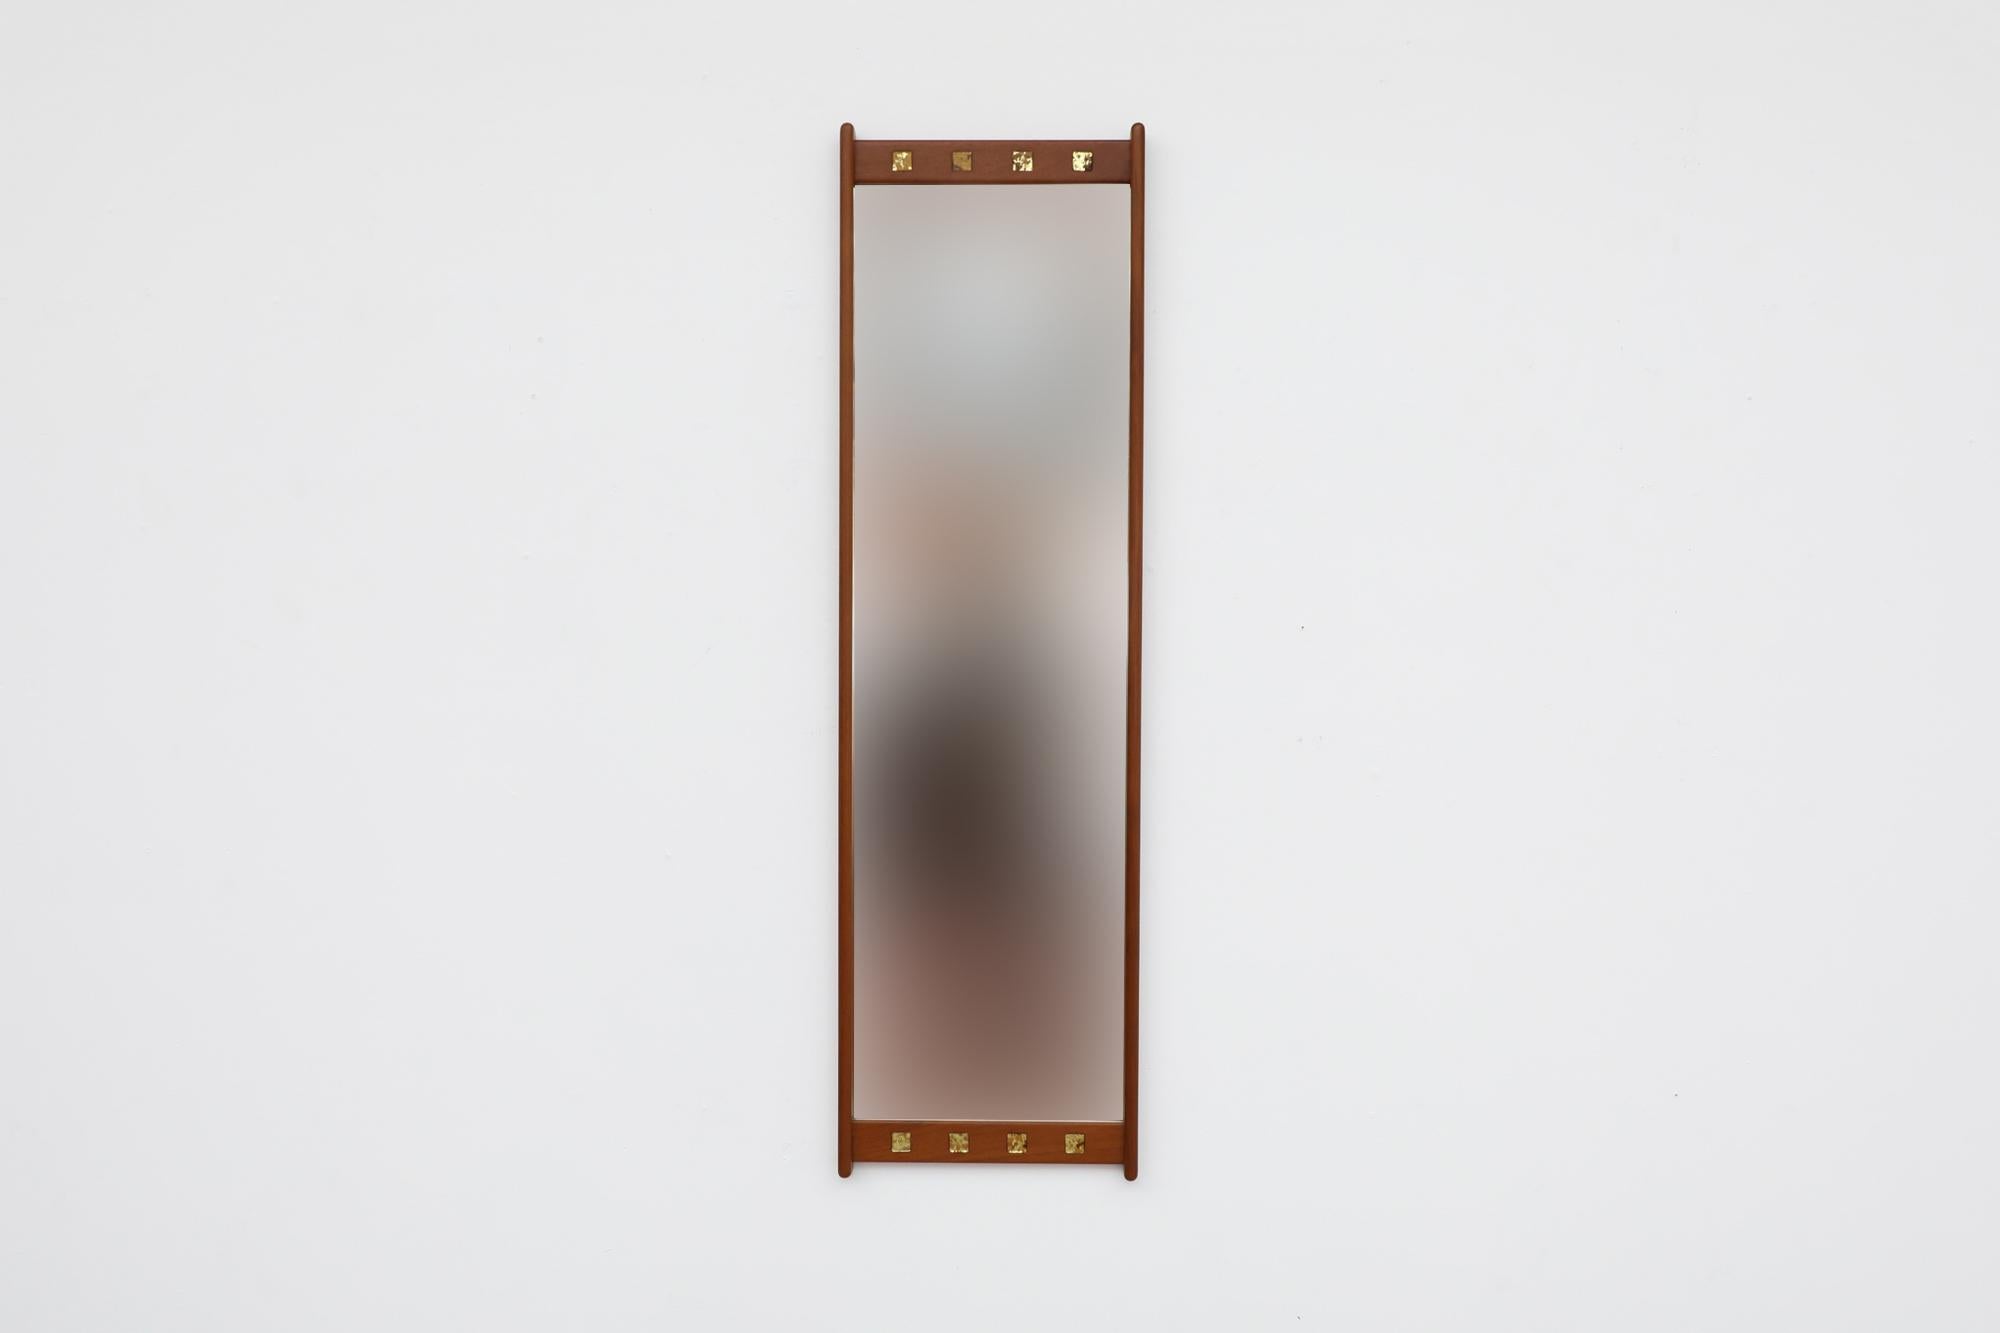 1950s teak wall mounted mirror by Fröseke AB Nybrofabriken. The frame is made from solid teak with decorative glass squares lining the top and bottom of mirror. In original condition with some visible wear consistent with its age and use. Other